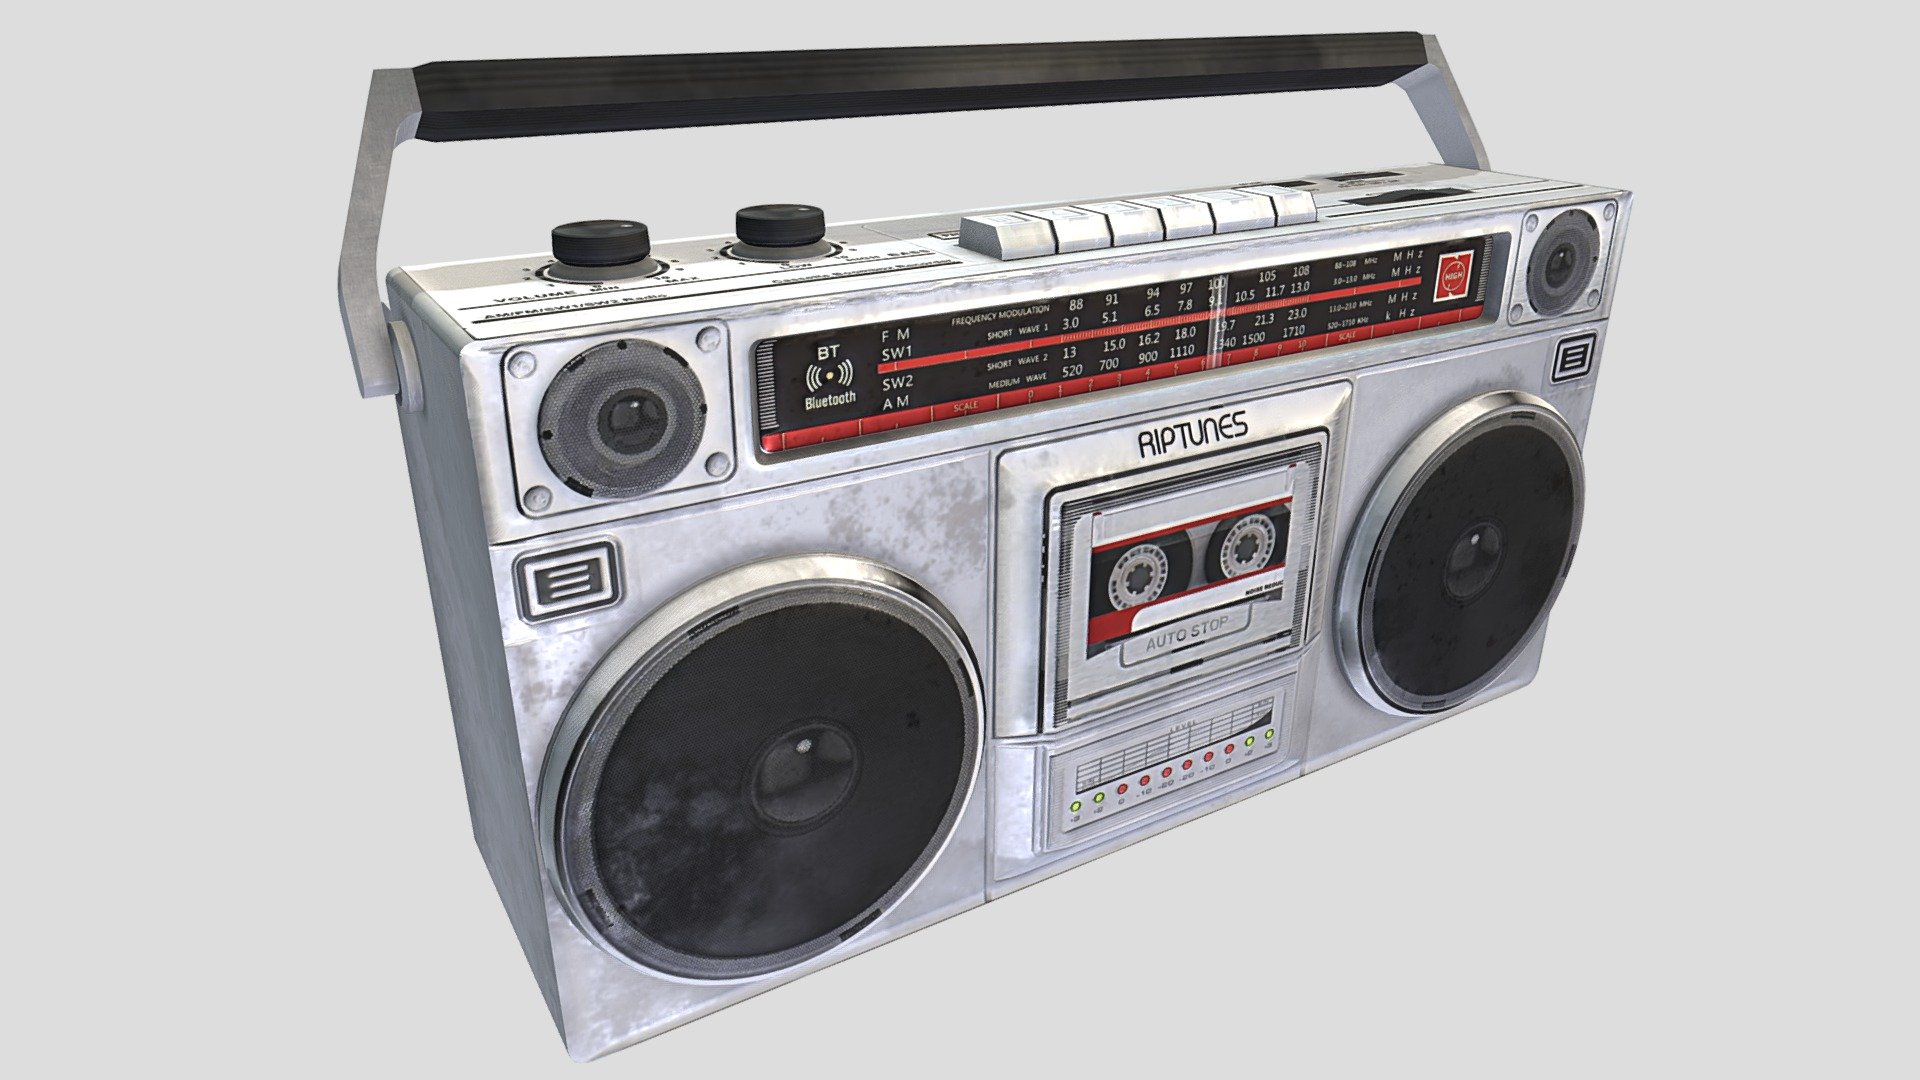 I modelled this 90's style Boombox Radio in Blender.  Model has normal-maps, it's fairly low-poly and is game-ready 3d model